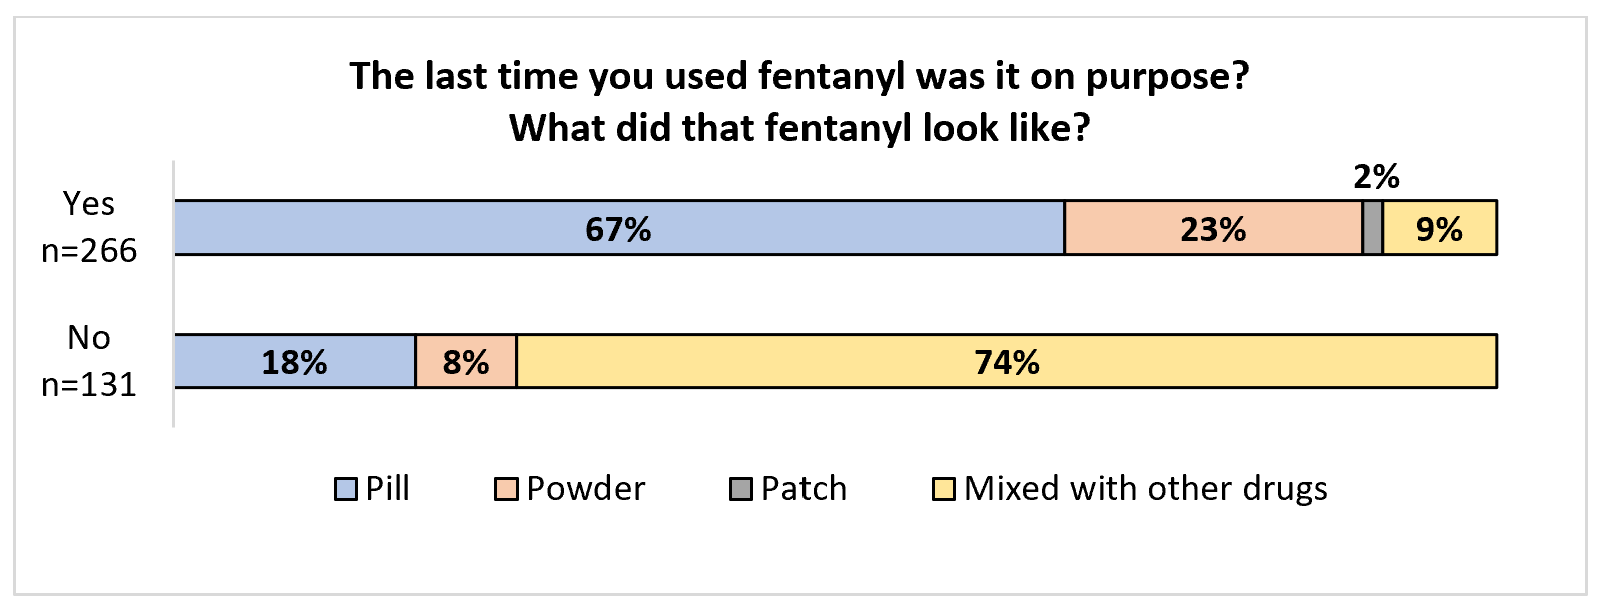 Bar charts showing answer to "The last time you used fentanyl, was it on purpose? What did that fentanyl look like?" For YES responses to Q1, 67% used in pill format, 23% as powder, 2% as patch, 9% mixed with other drugs. for NO responses, 18% pill, 8% powder, 74% mixed with other drugs.